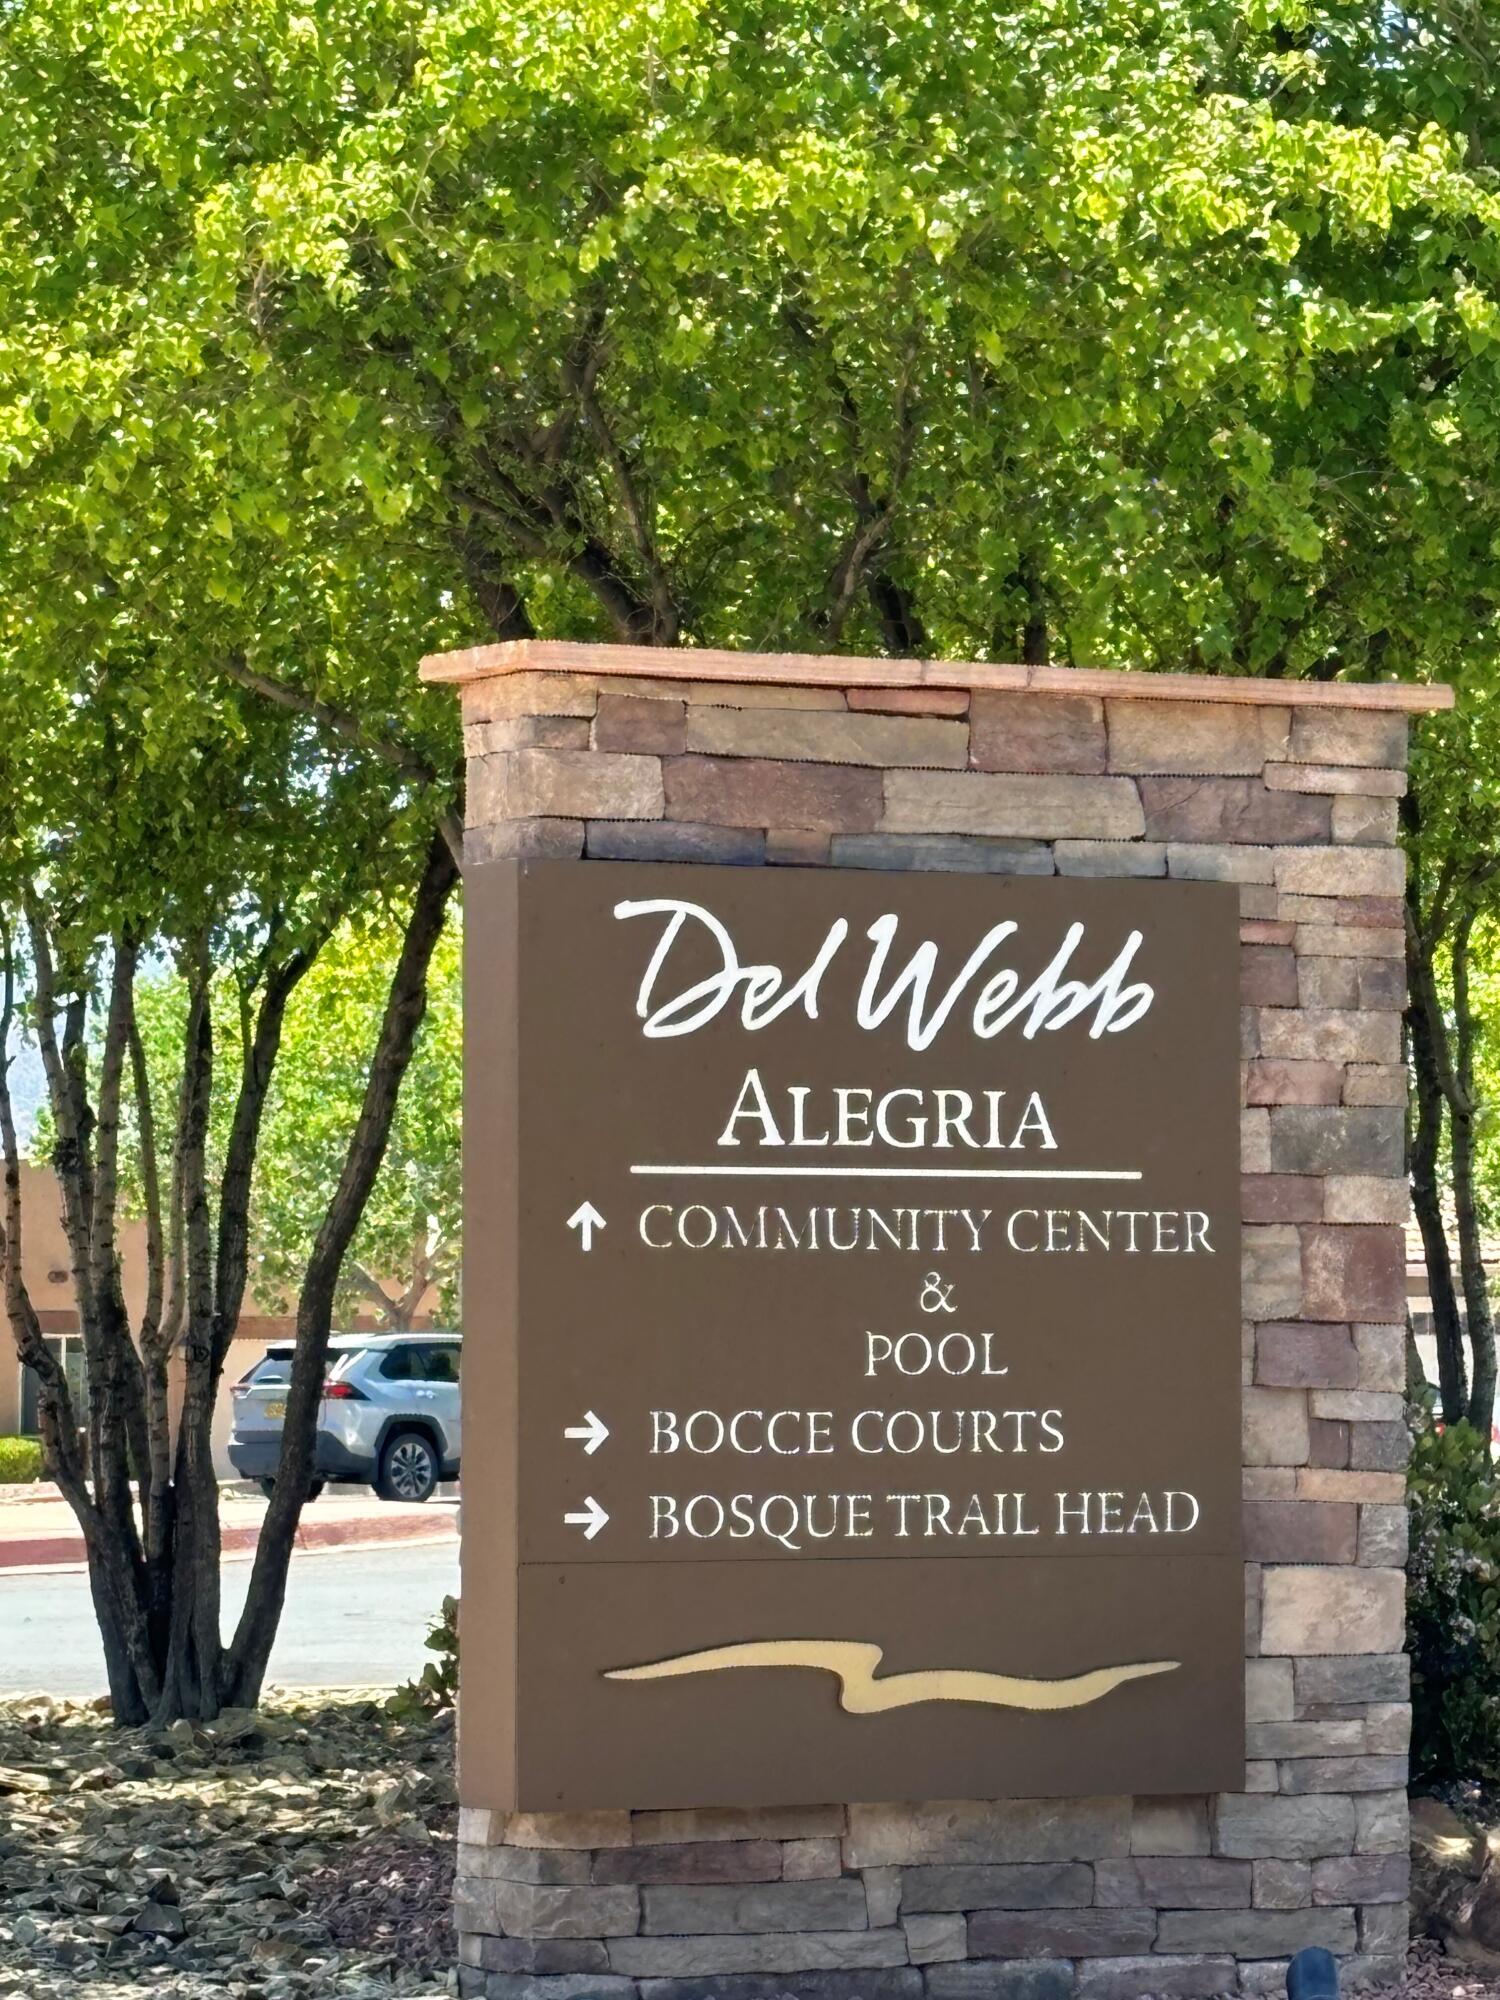 Glorious Del Webb Alegria neighborhood:   Gated planned community for 55+ in the heart of Bernalillo- this home lies near the community pool & clubhouse with a beautiful corner lot!  Wide open floorplan with huge kitchen island- lots of seating, pantry!  Fabulous flooring- large neutral tile and recent hard wood floors & carpet.  Recent hot water heater, recirculating hot water!  Super convenient to restaurants & shops.  Lovely zero-scape, easy maintenance, automatic sprinklers covered patio with gas stub for BBQ!  Faces Northeast.  Call to view this impeccably maintained home today- it wont last!